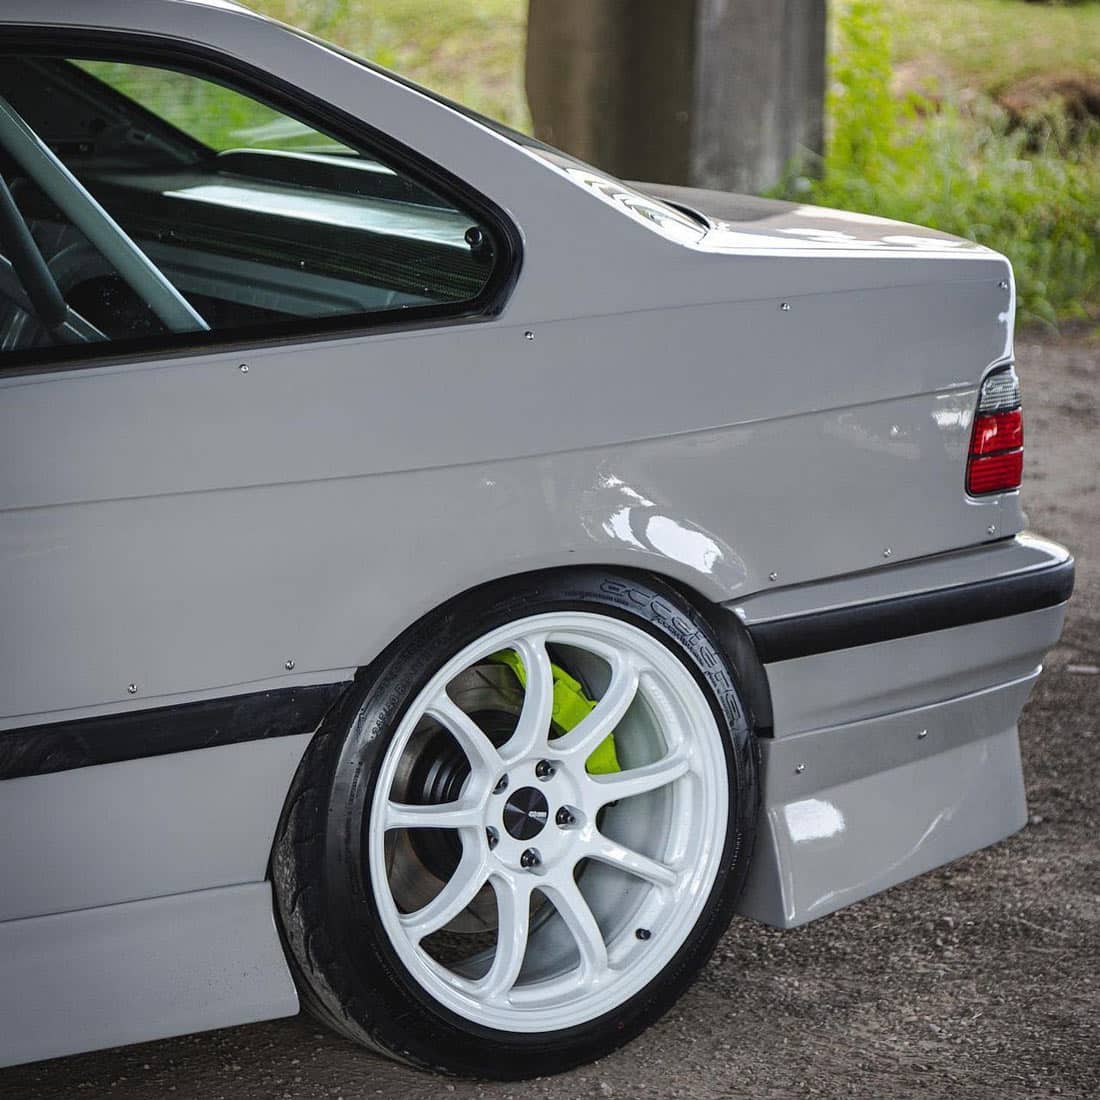 BMW E36 COUPE OVERFENDERS FRONT & REAR - CLIQTUNING